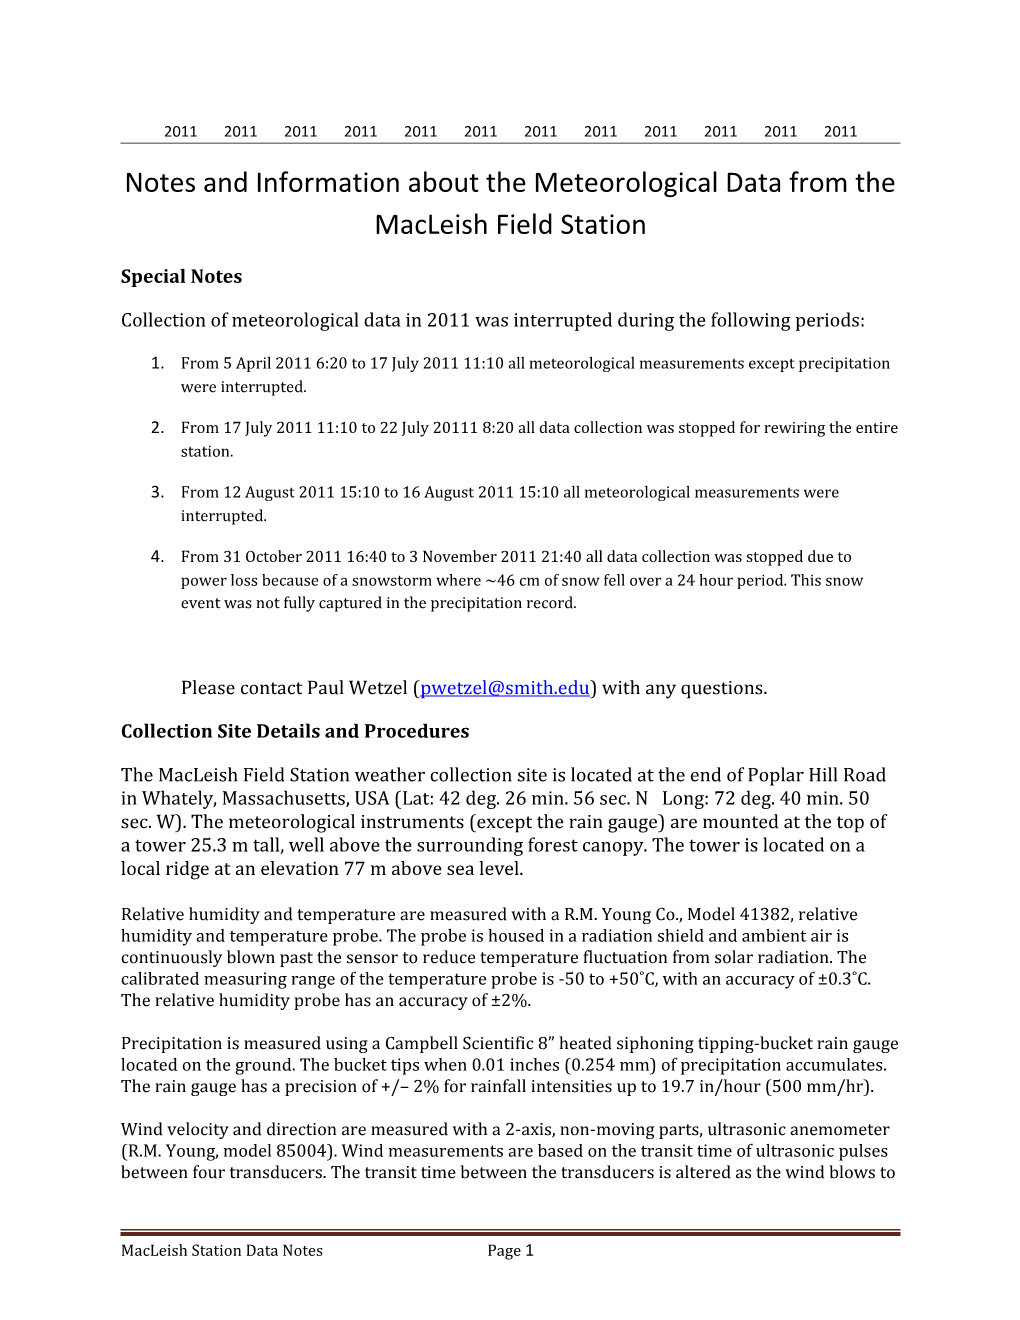 Notes and Information About the Meteorological Data from the Macleish Field Station